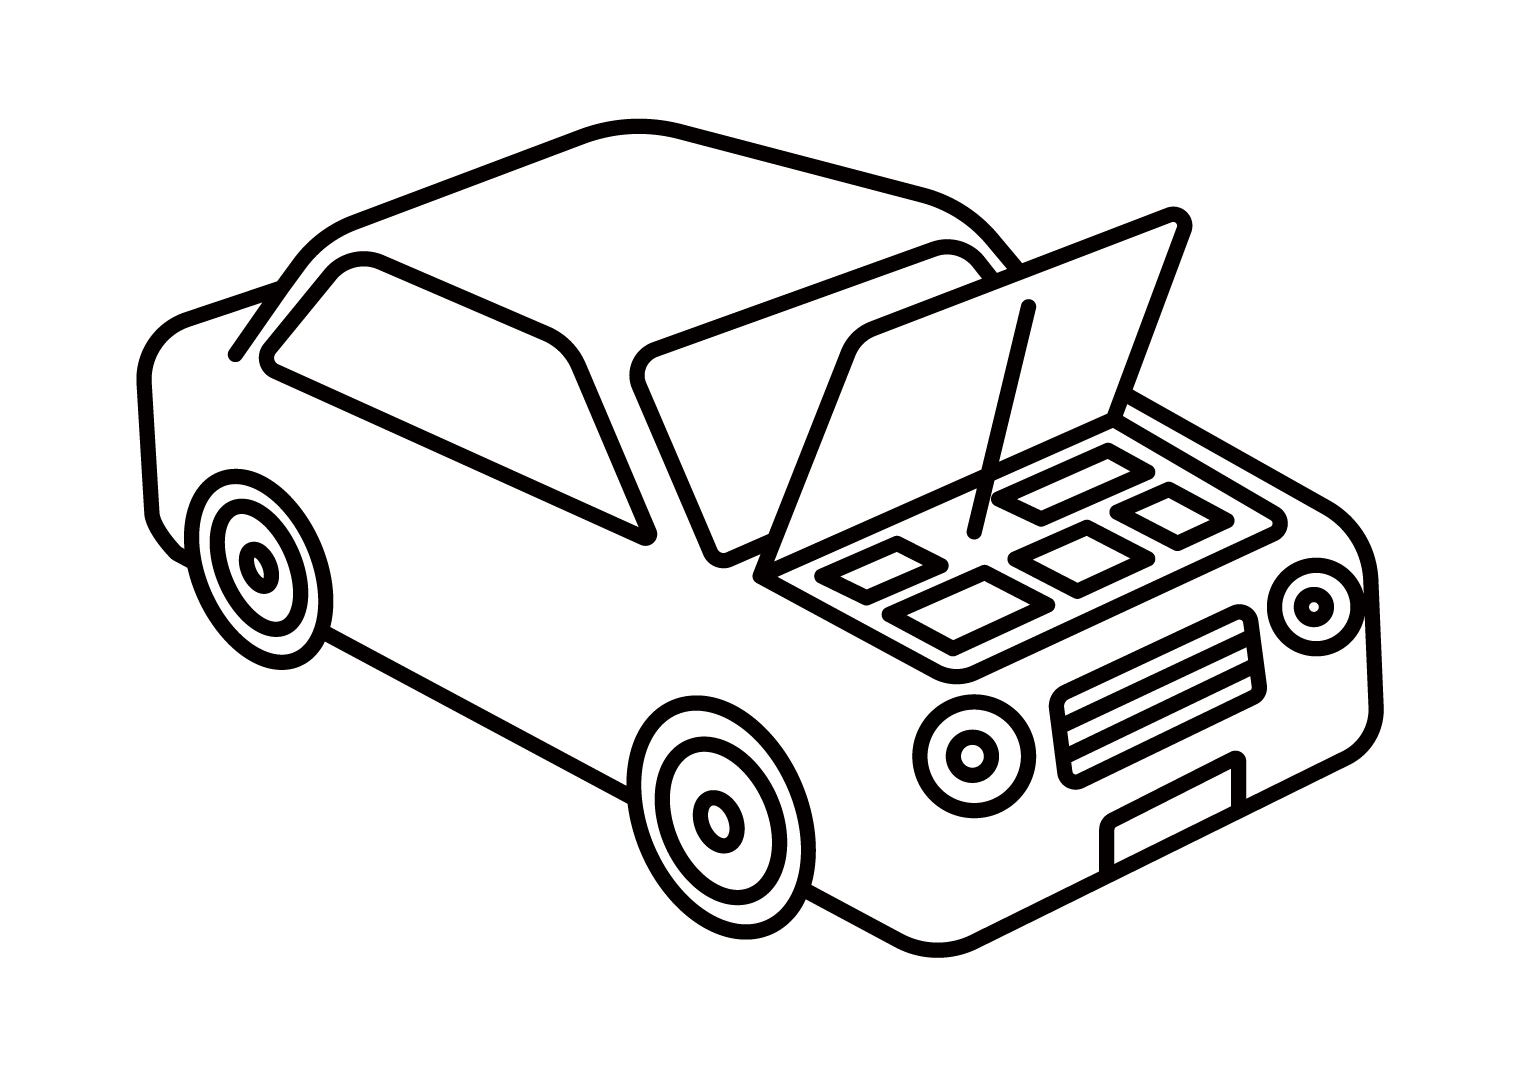 Illustration of a car with the hood open